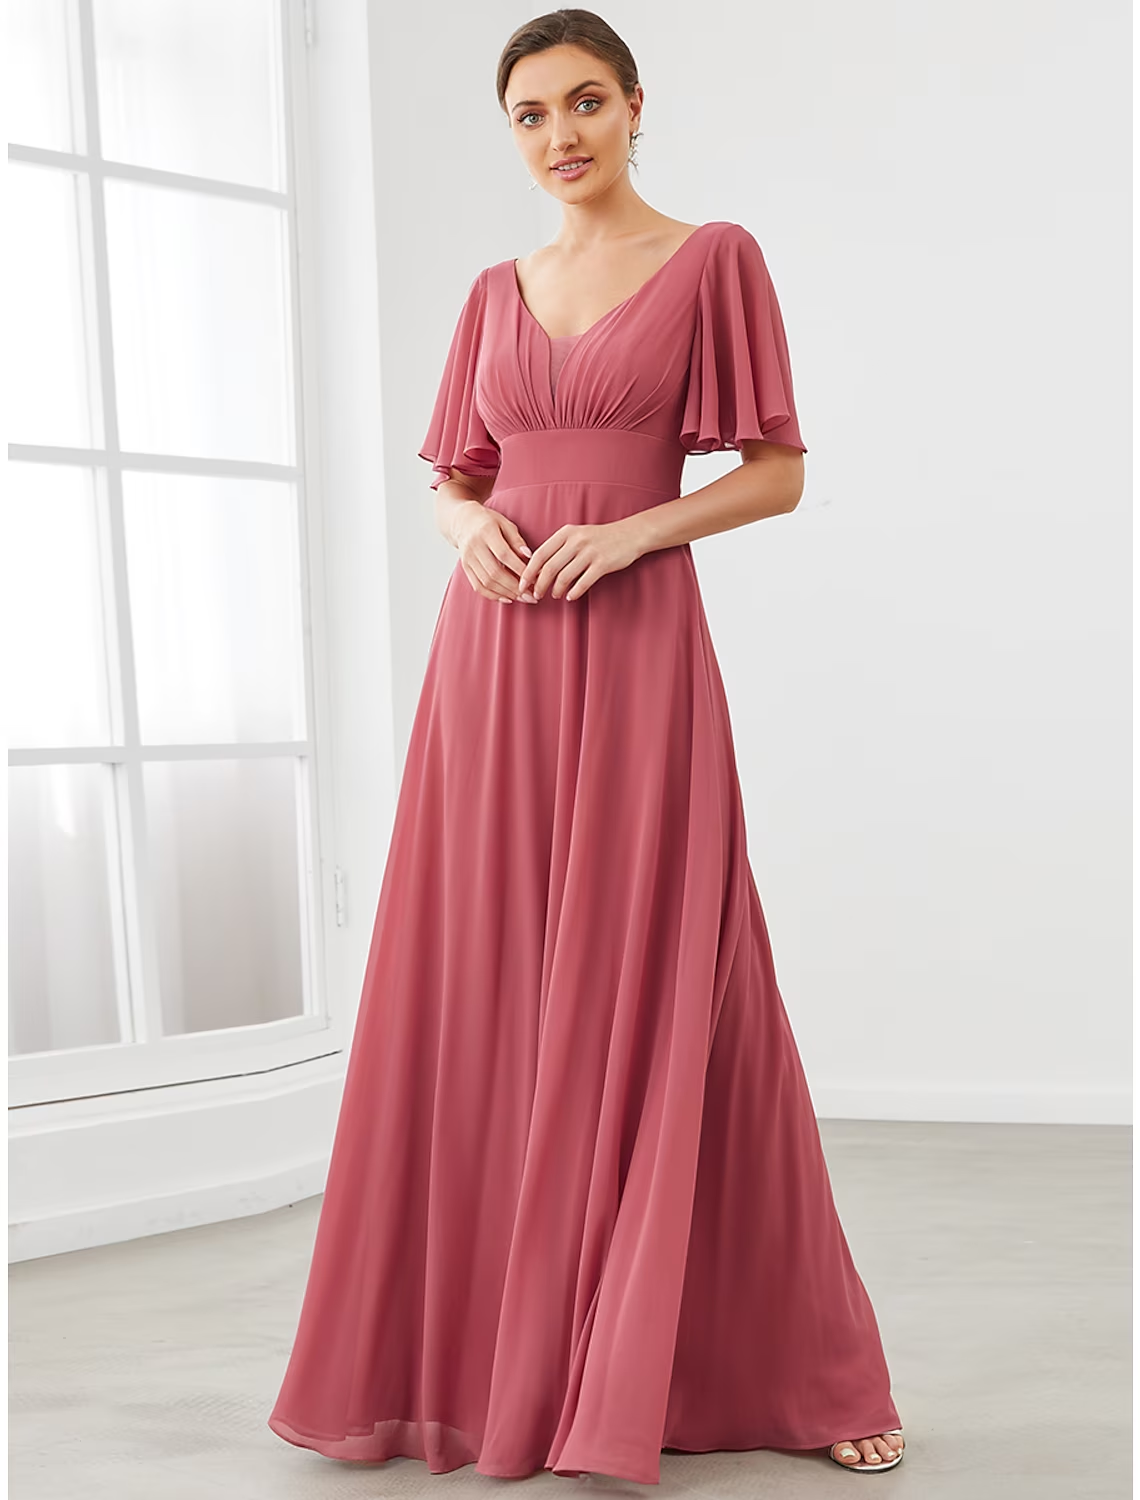 A-Line Bridesmaid Dress V Neck Short Sleeve Plus Size Floor Length Chiffon with Pleats / Draping / Solid Color